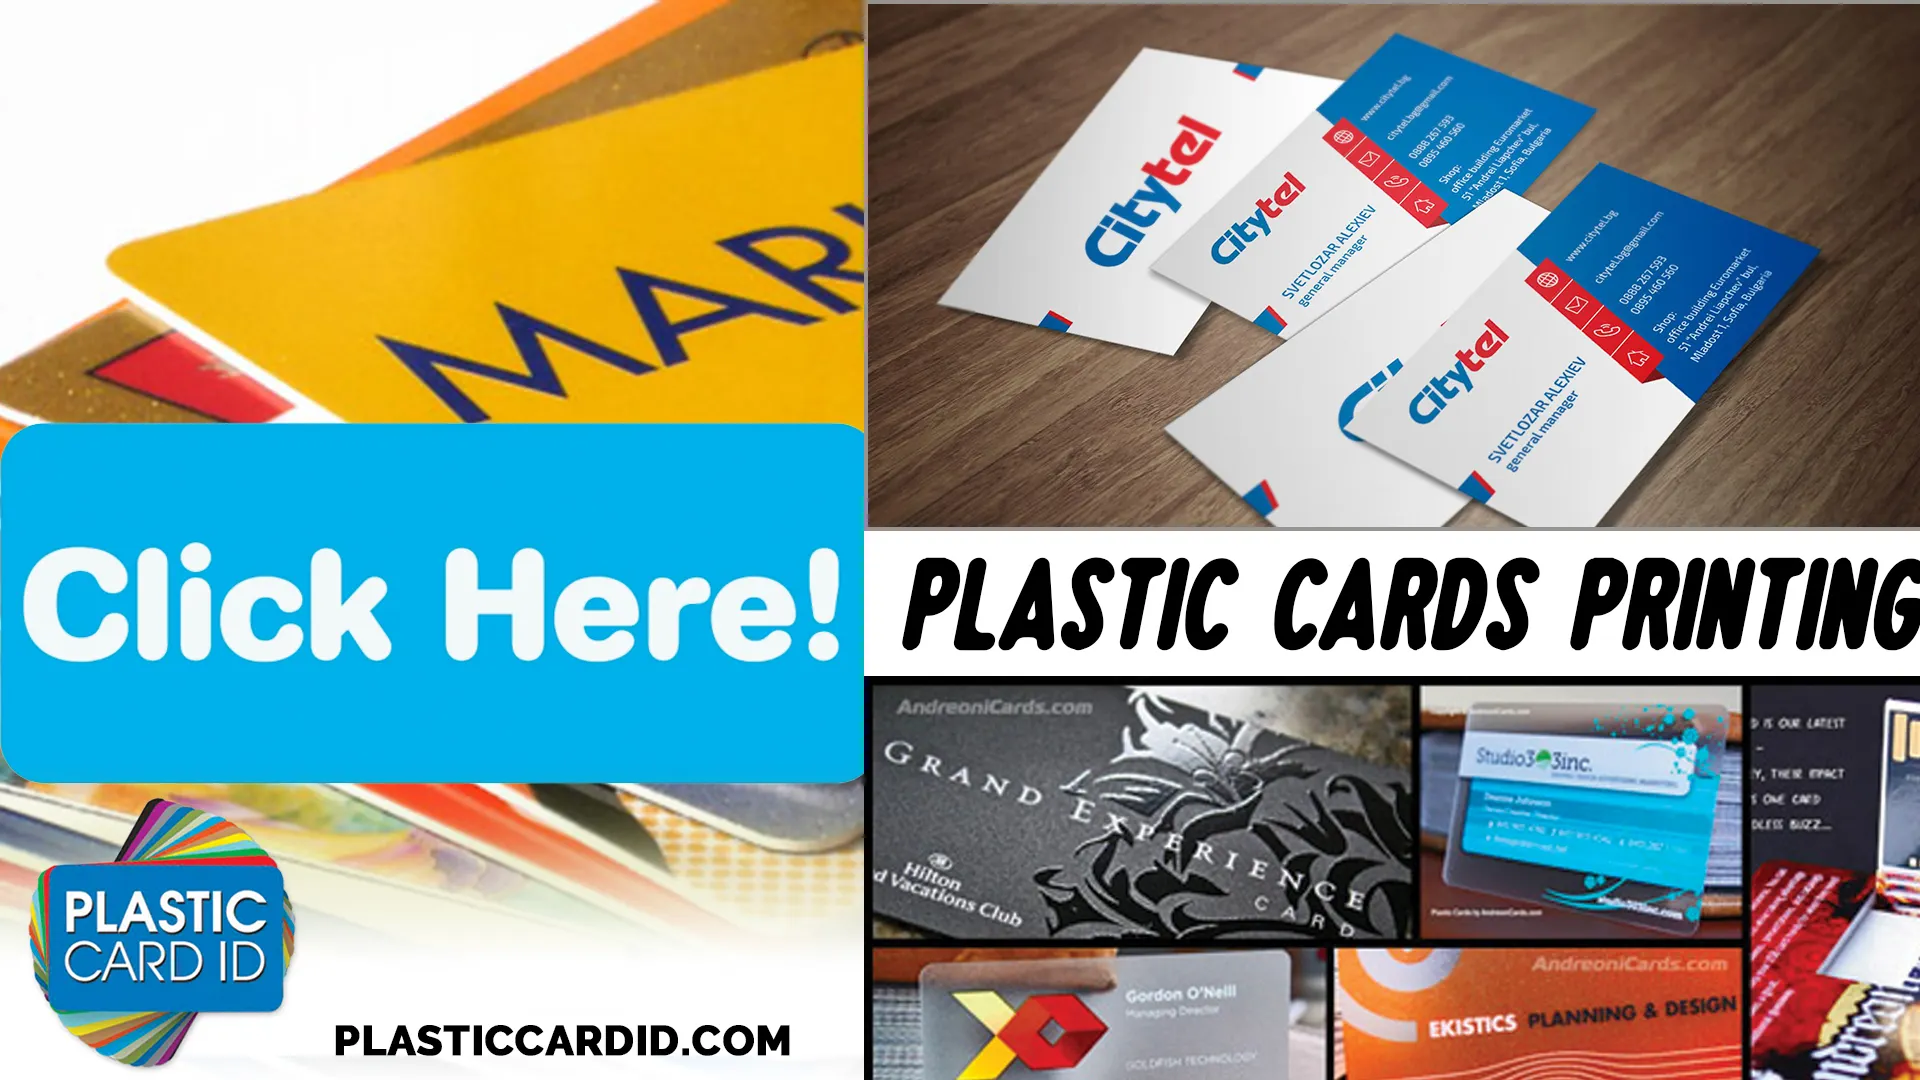 Plastic Card ID
: Innovating for a Secure Tomorrow